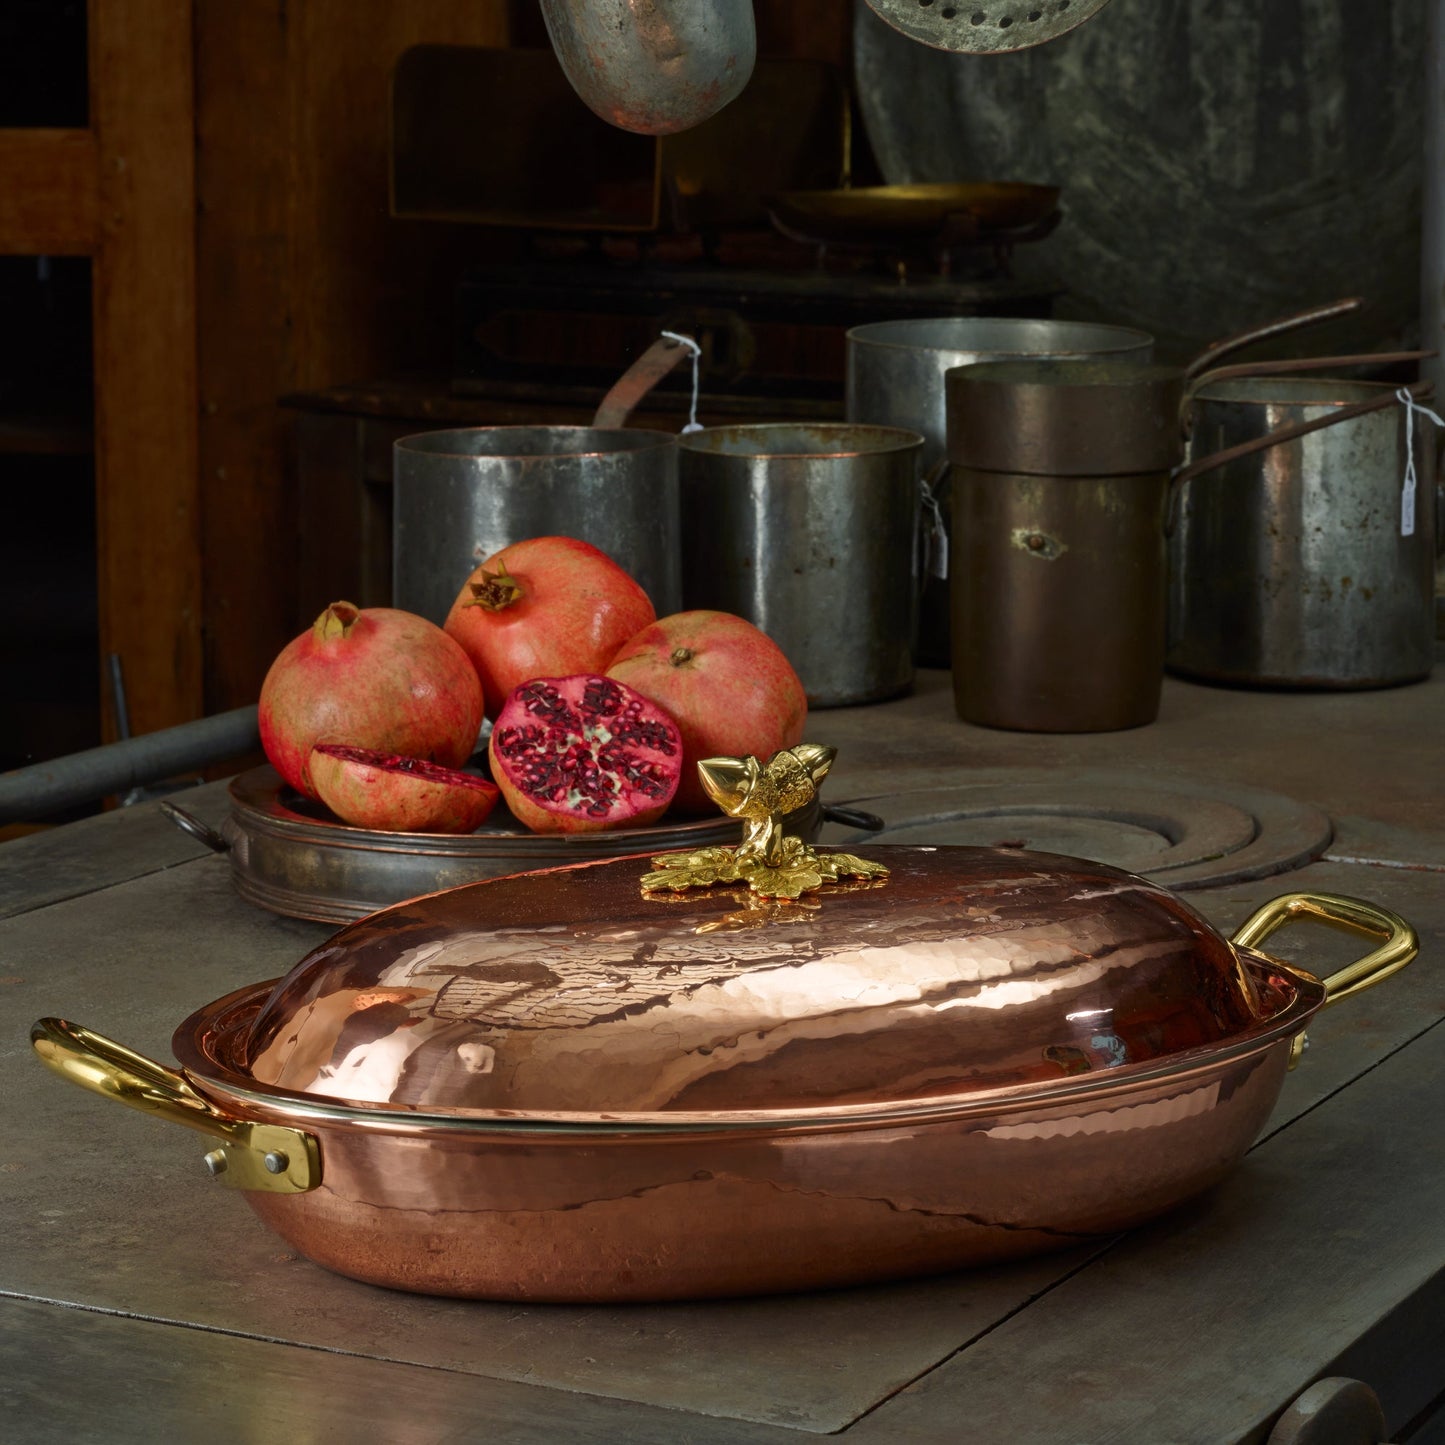 Hammered copper 4.5 Oval Low Braiser lined with high purity tin applied by hand over fire and bronze handles, from Ruffoni Historia collection